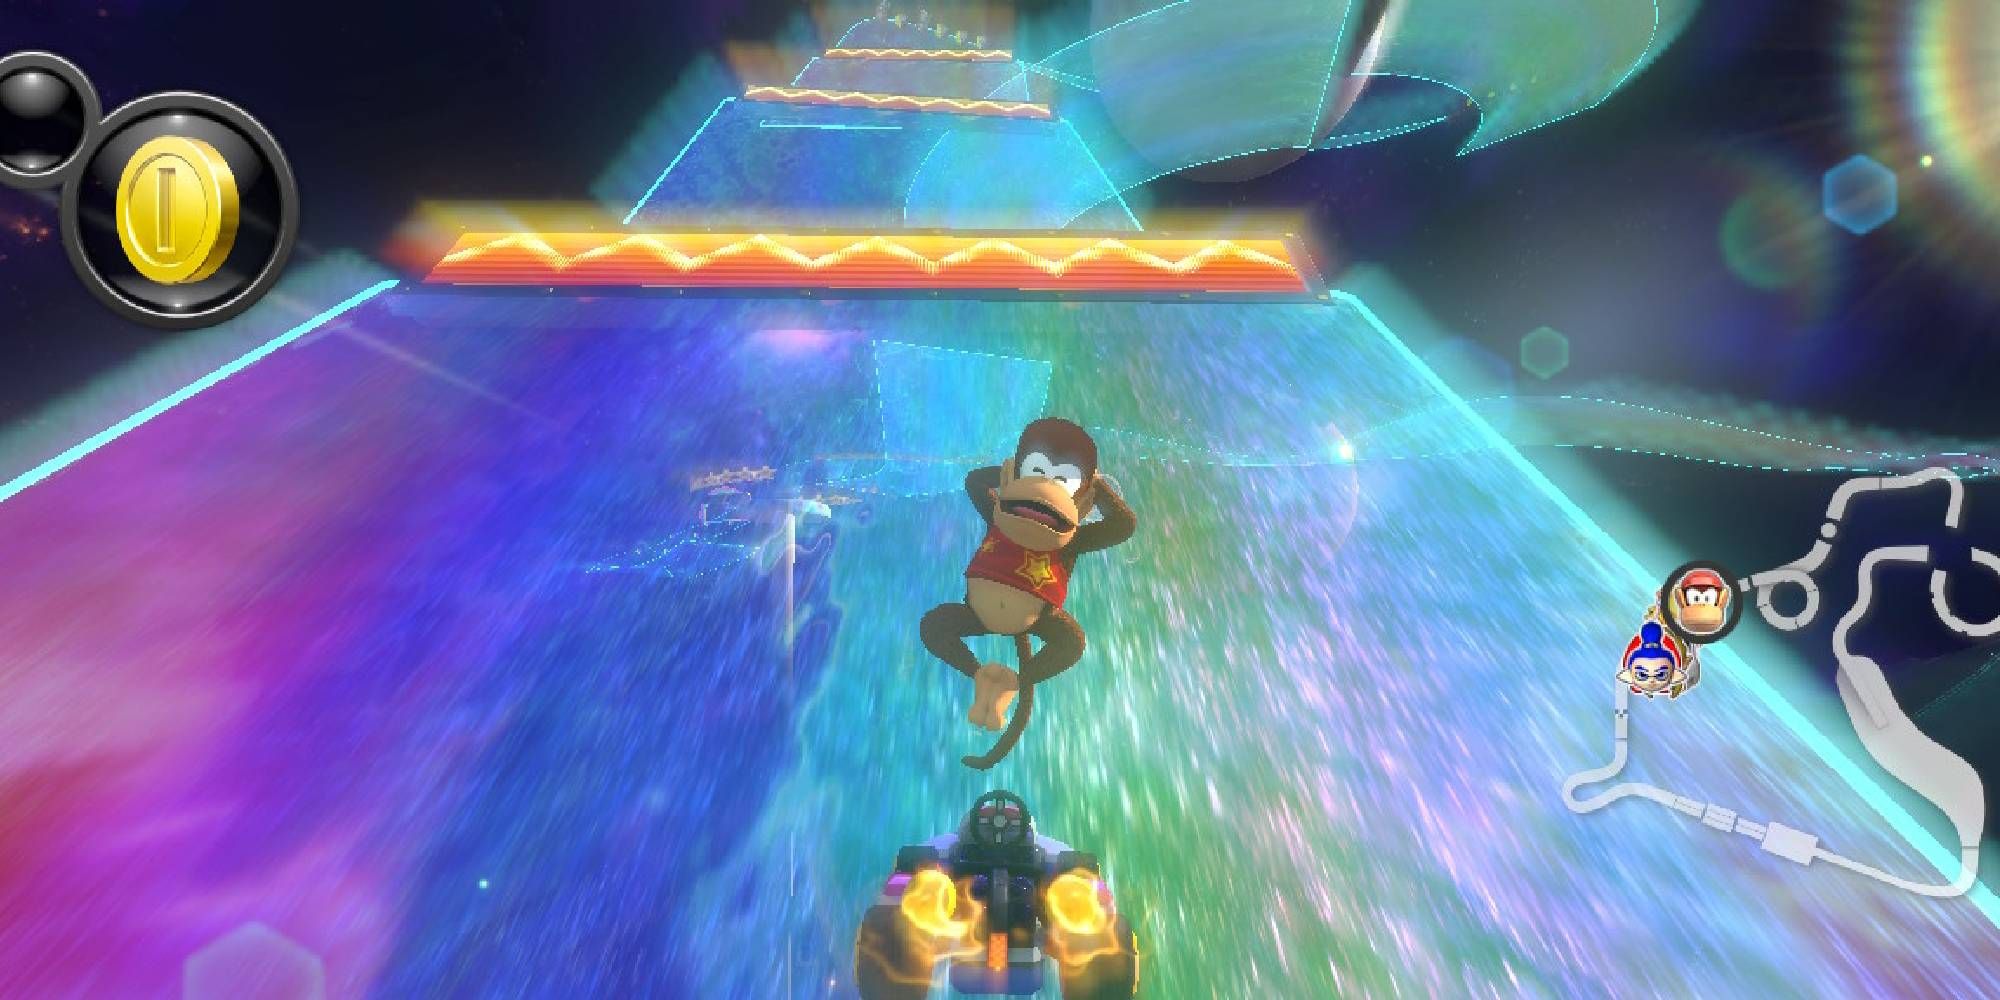 diddy kong tricking before dash pad in rainbow road 7 3ds mario kart 8 deluxe